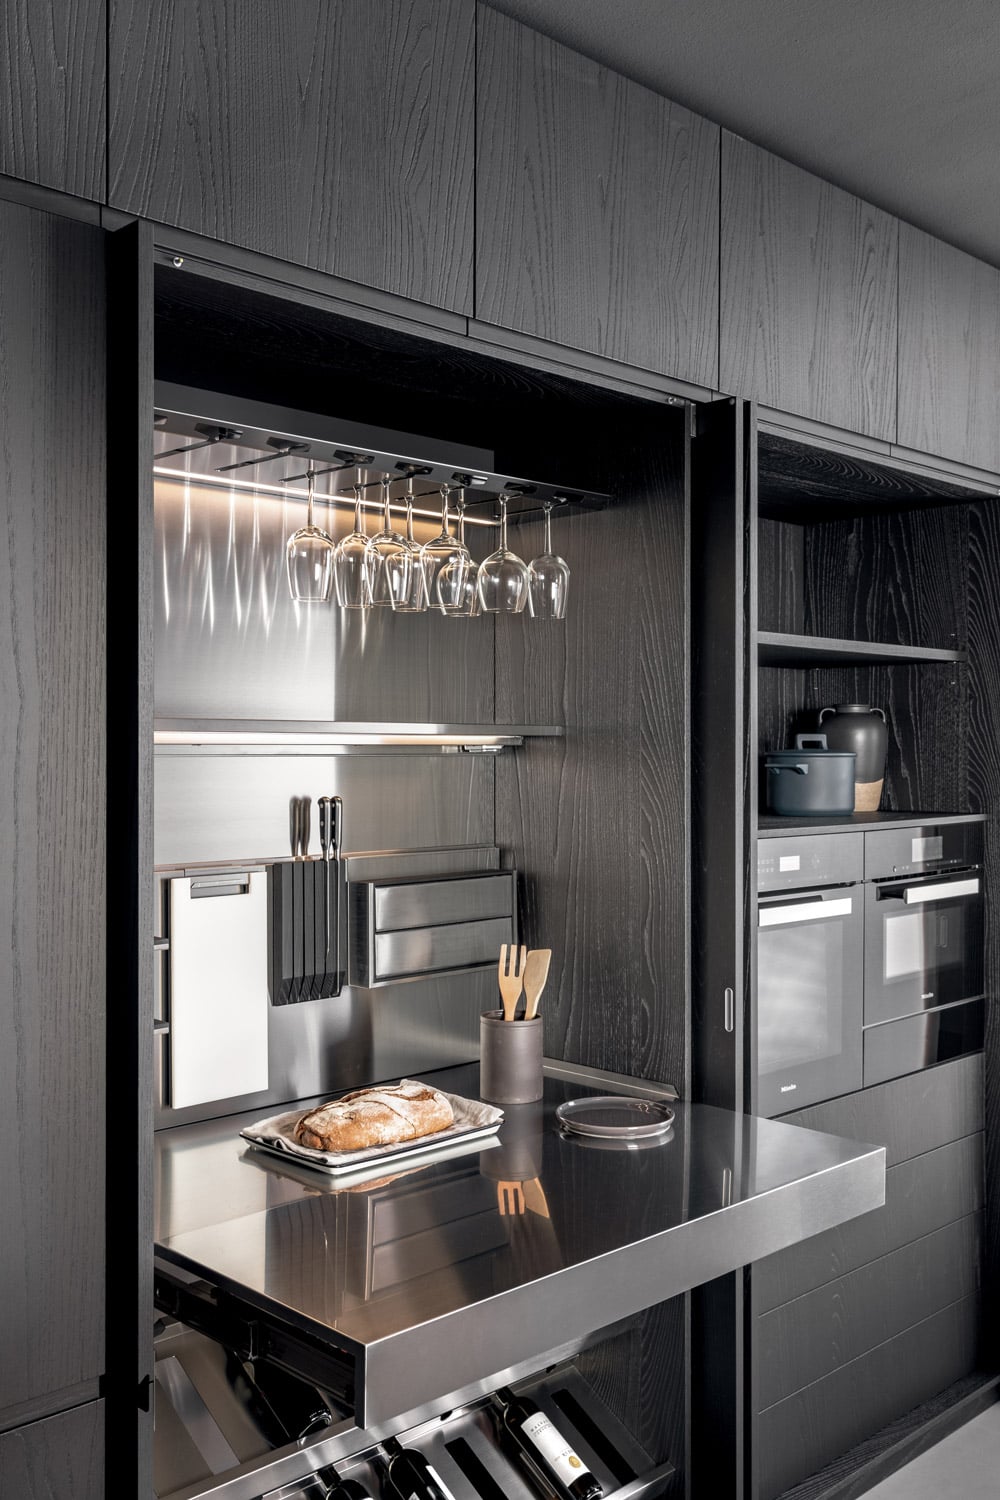 Multifunctional tall unit customized to house wine racks, drawers, glassware, and knives while also including a full pull-out stainless steel worktop to extend the usable surface area.